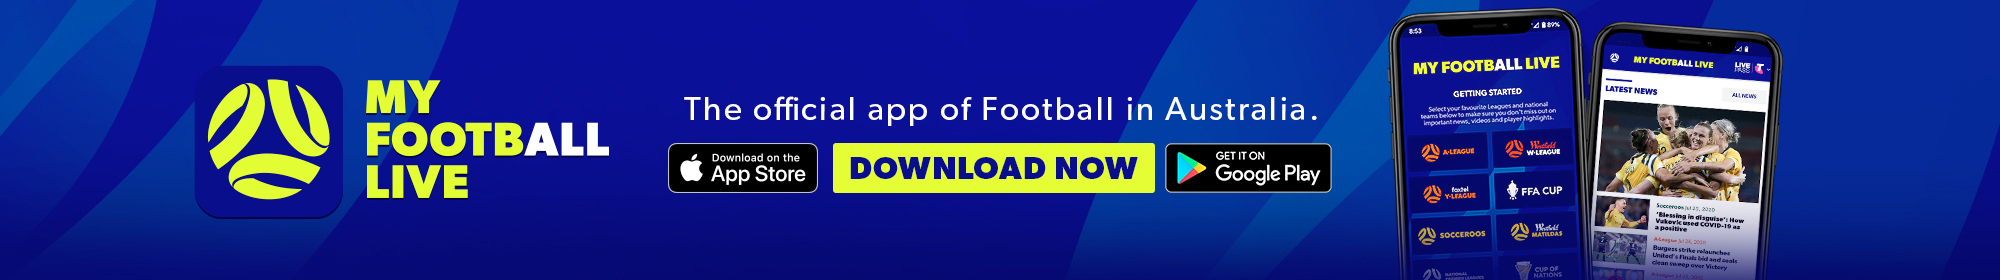 My Football Live app updated 2021